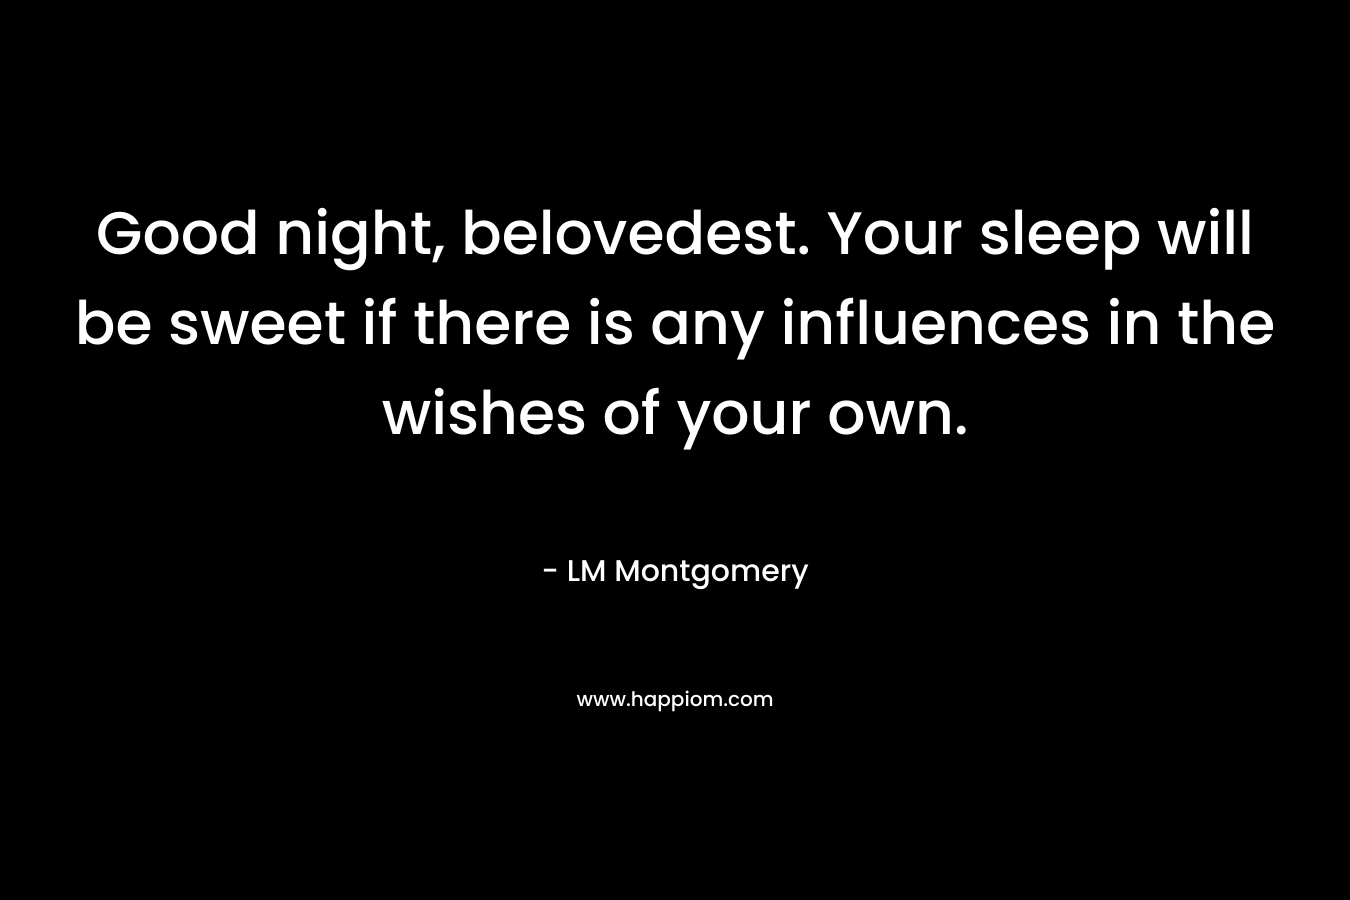 Good night, belovedest. Your sleep will be sweet if there is any influences in the wishes of your own. – LM Montgomery